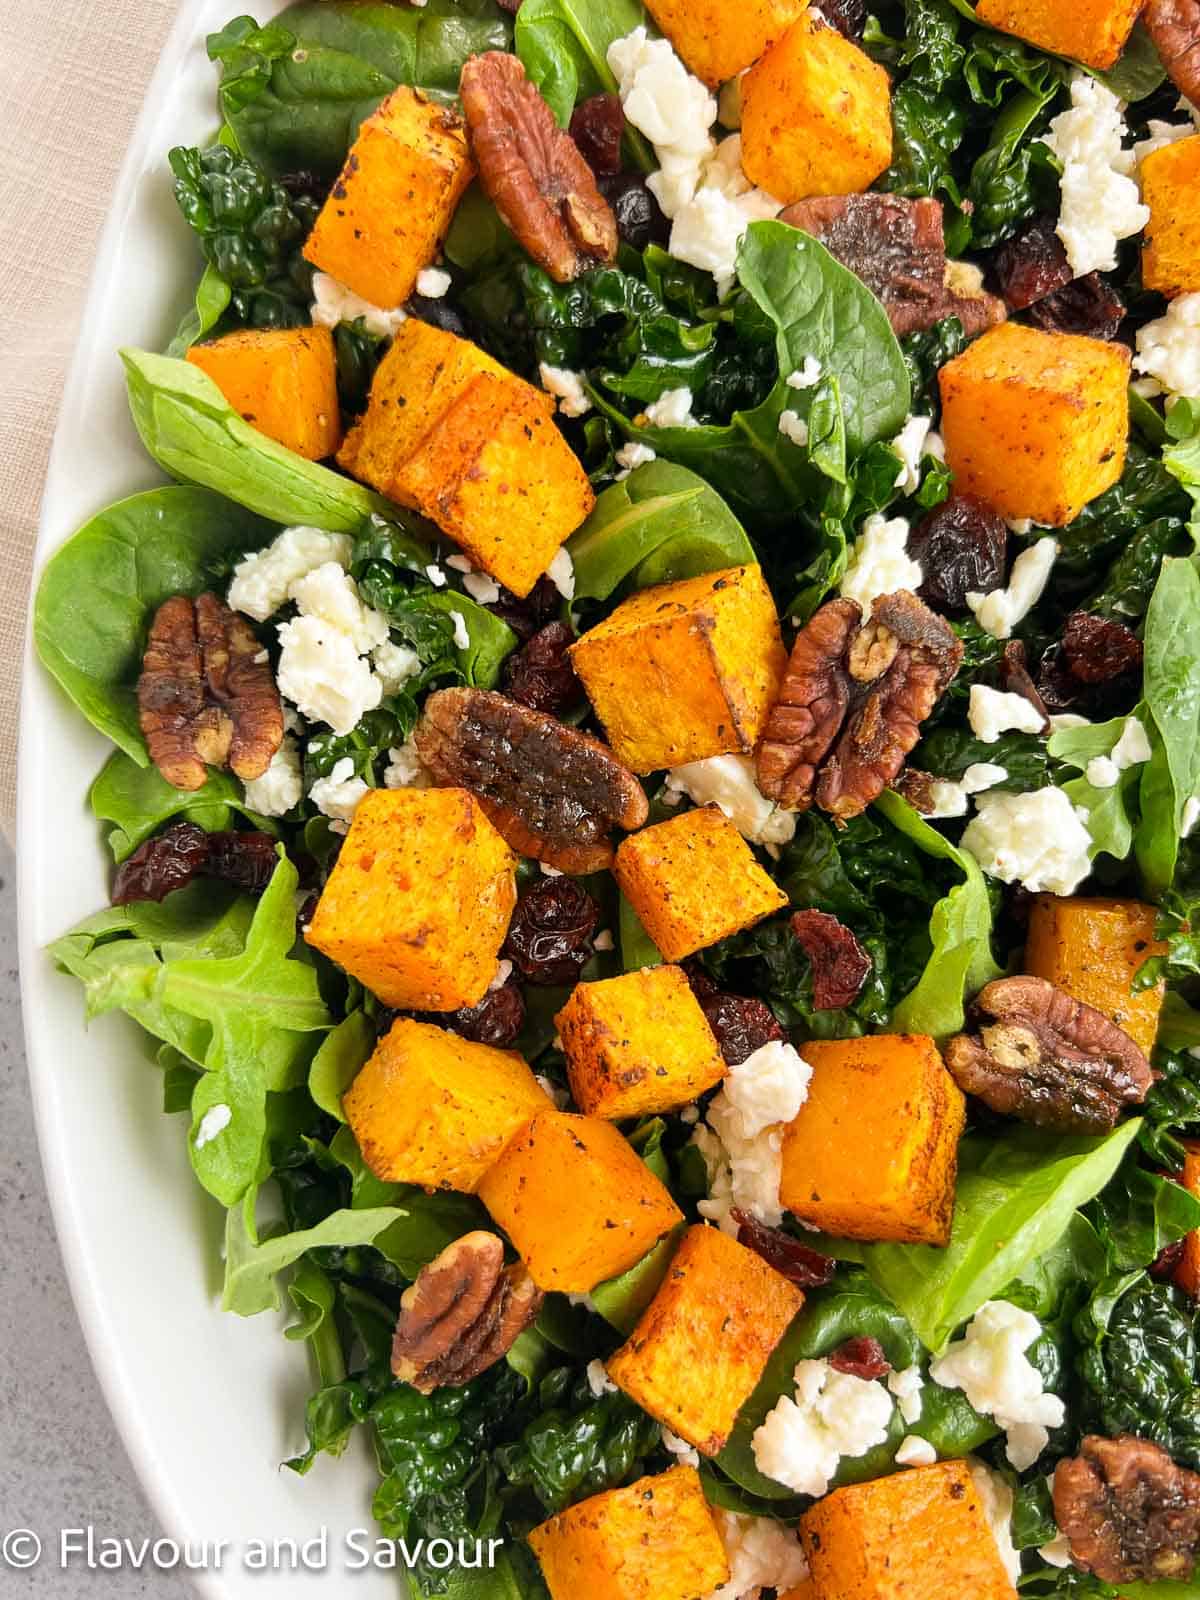 Butternut squash salad showing detail of squash cubes, toasted pecans, cranberries and feta cheese.